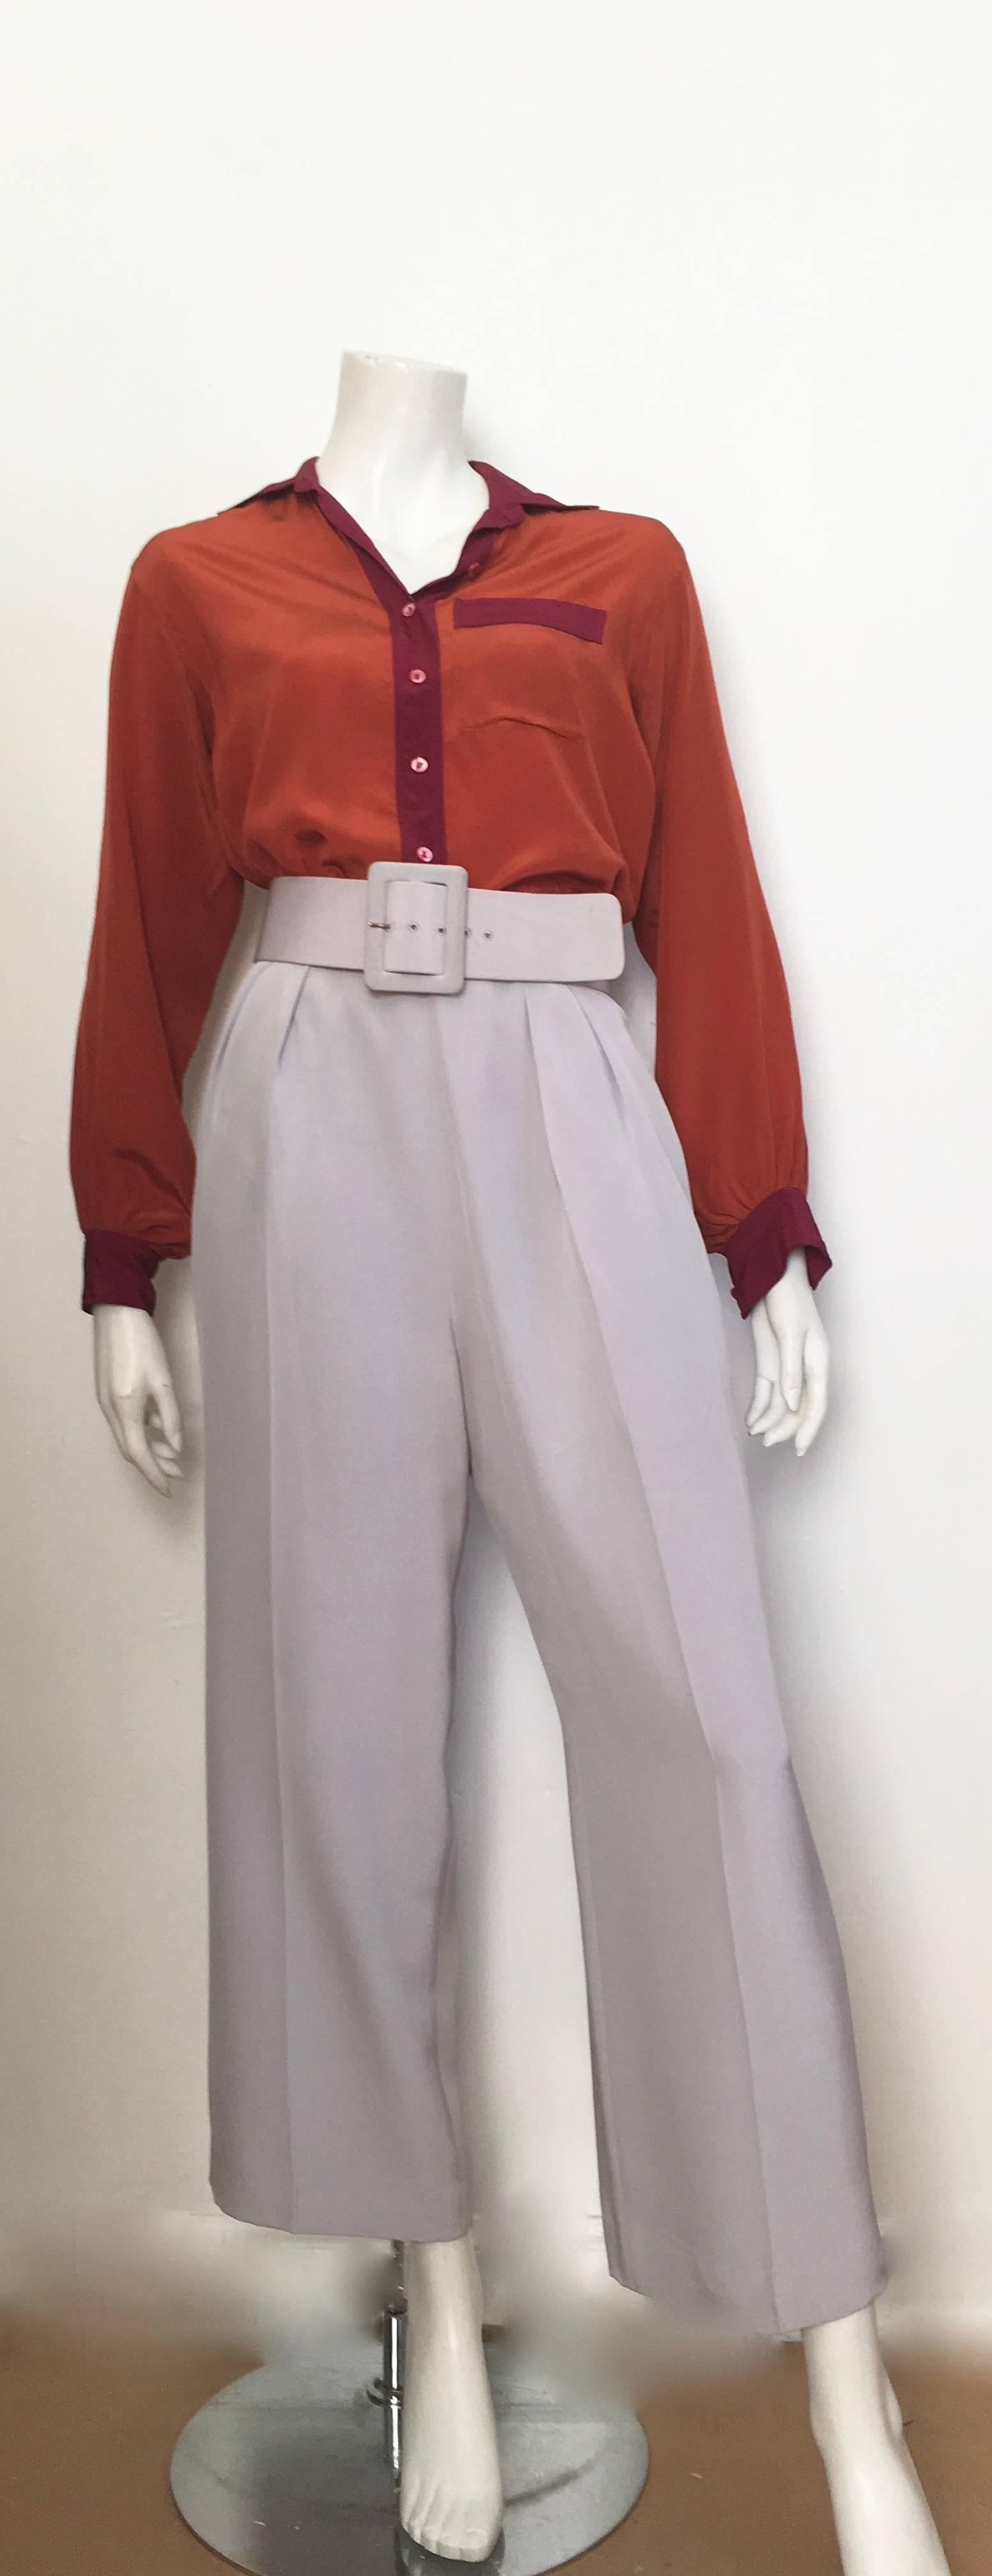 Oscar de la Renta silk silver grey pleated pants with pockets & belt is labeled a size 8 but fits a size 6.  The waist is 29